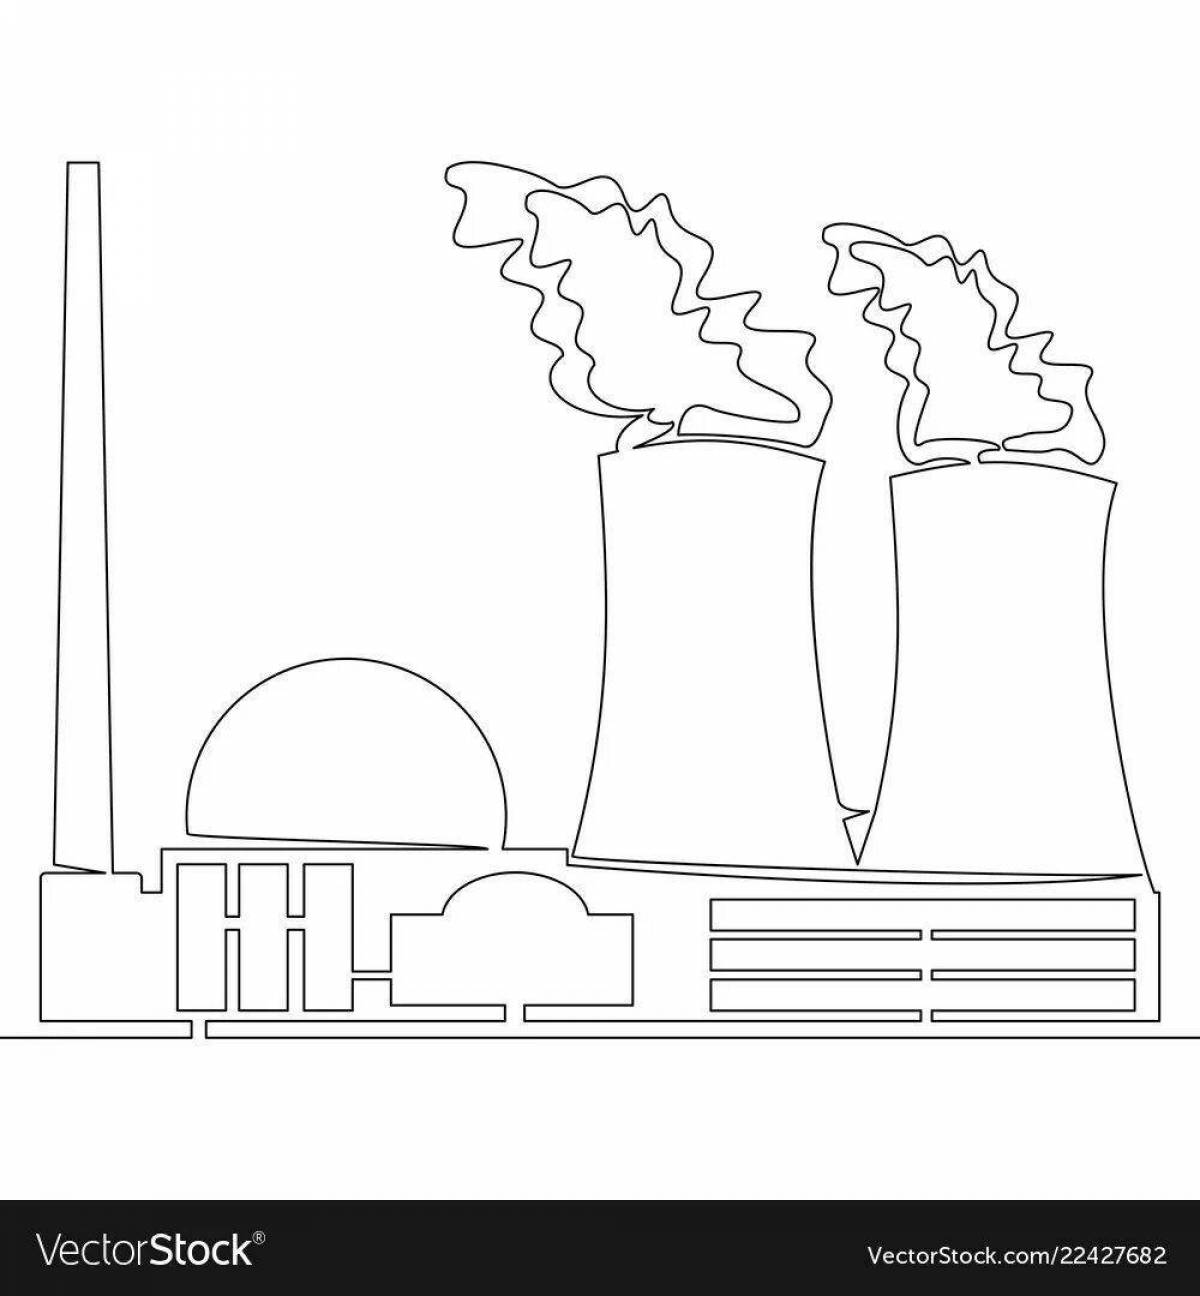 Coloring page decorated Chernobyl station